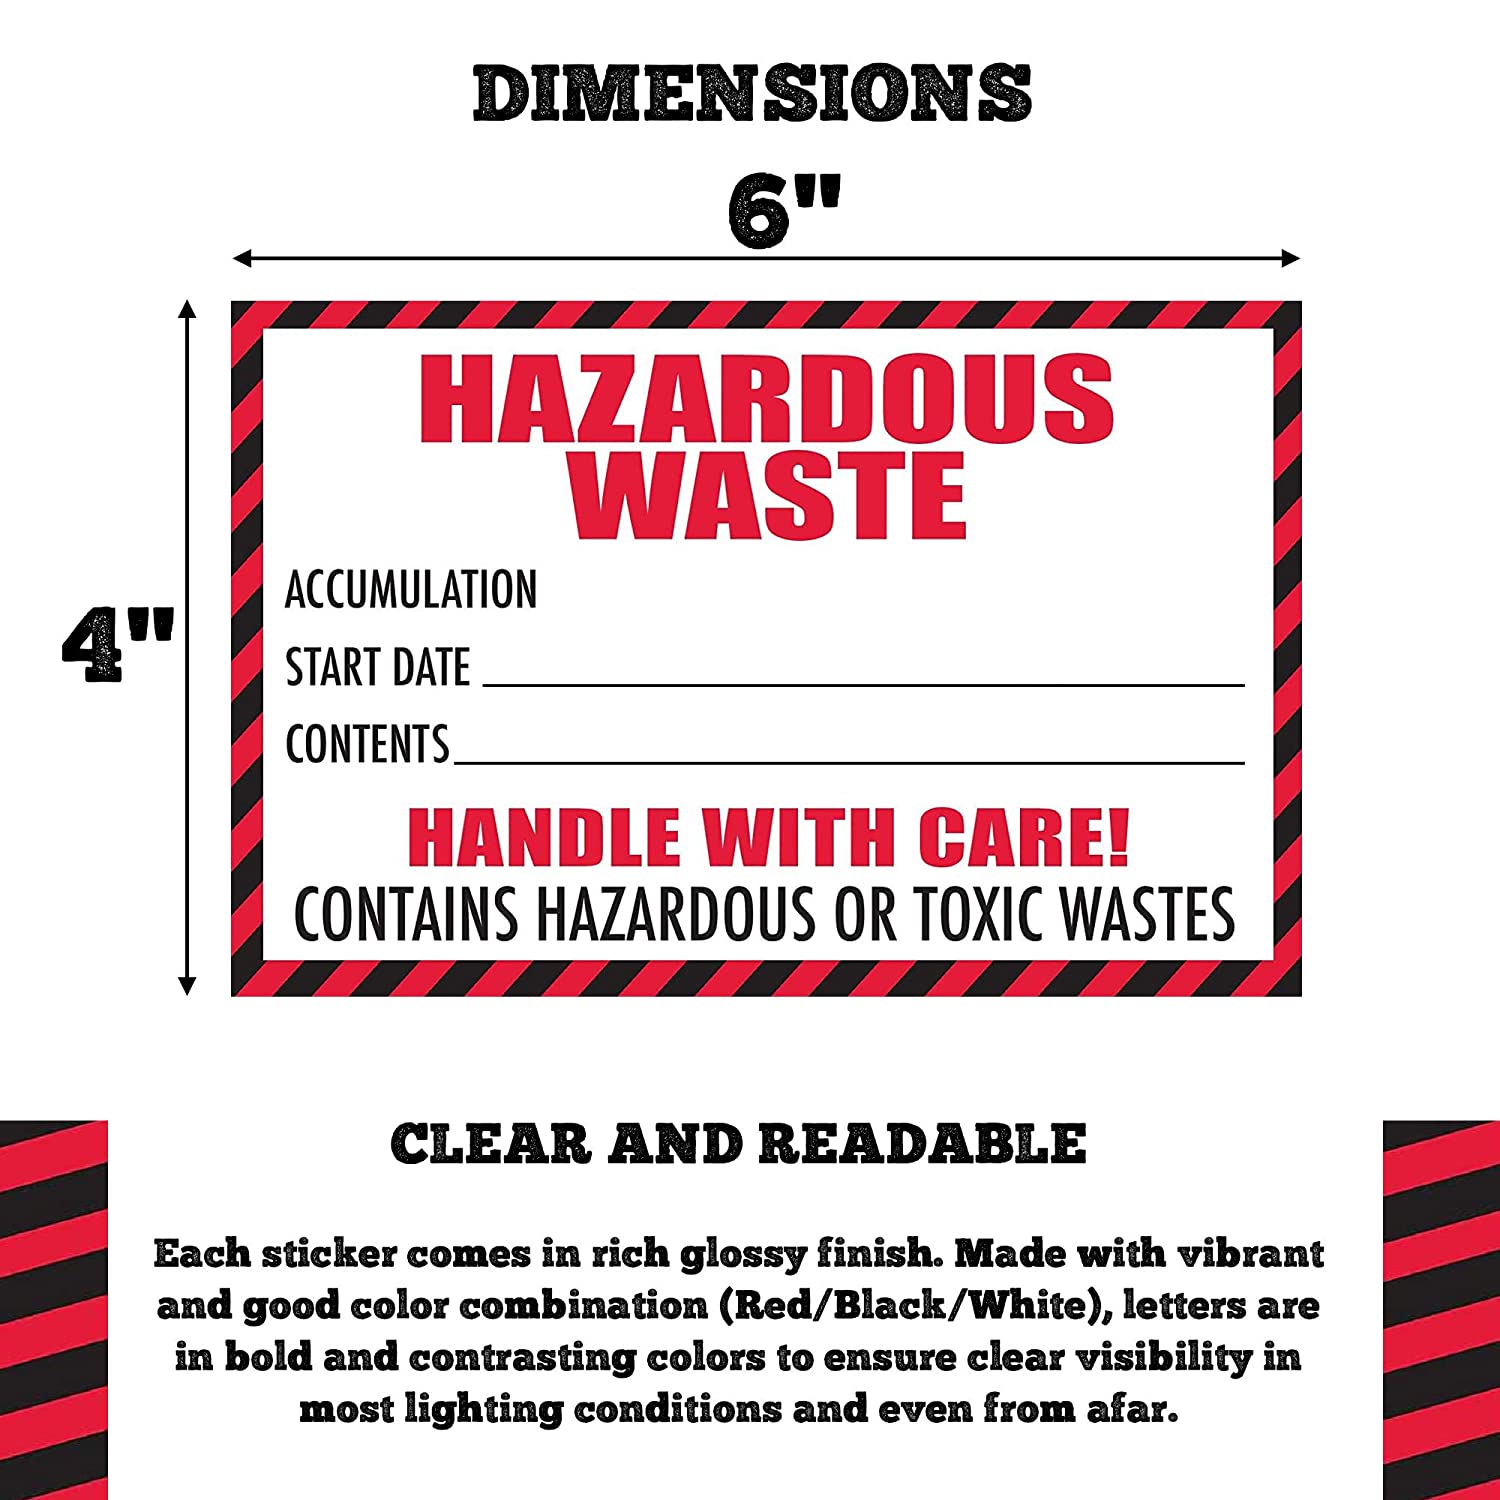 Hazardous Waste Label with Handle with Care, 4"x6" in dimensions